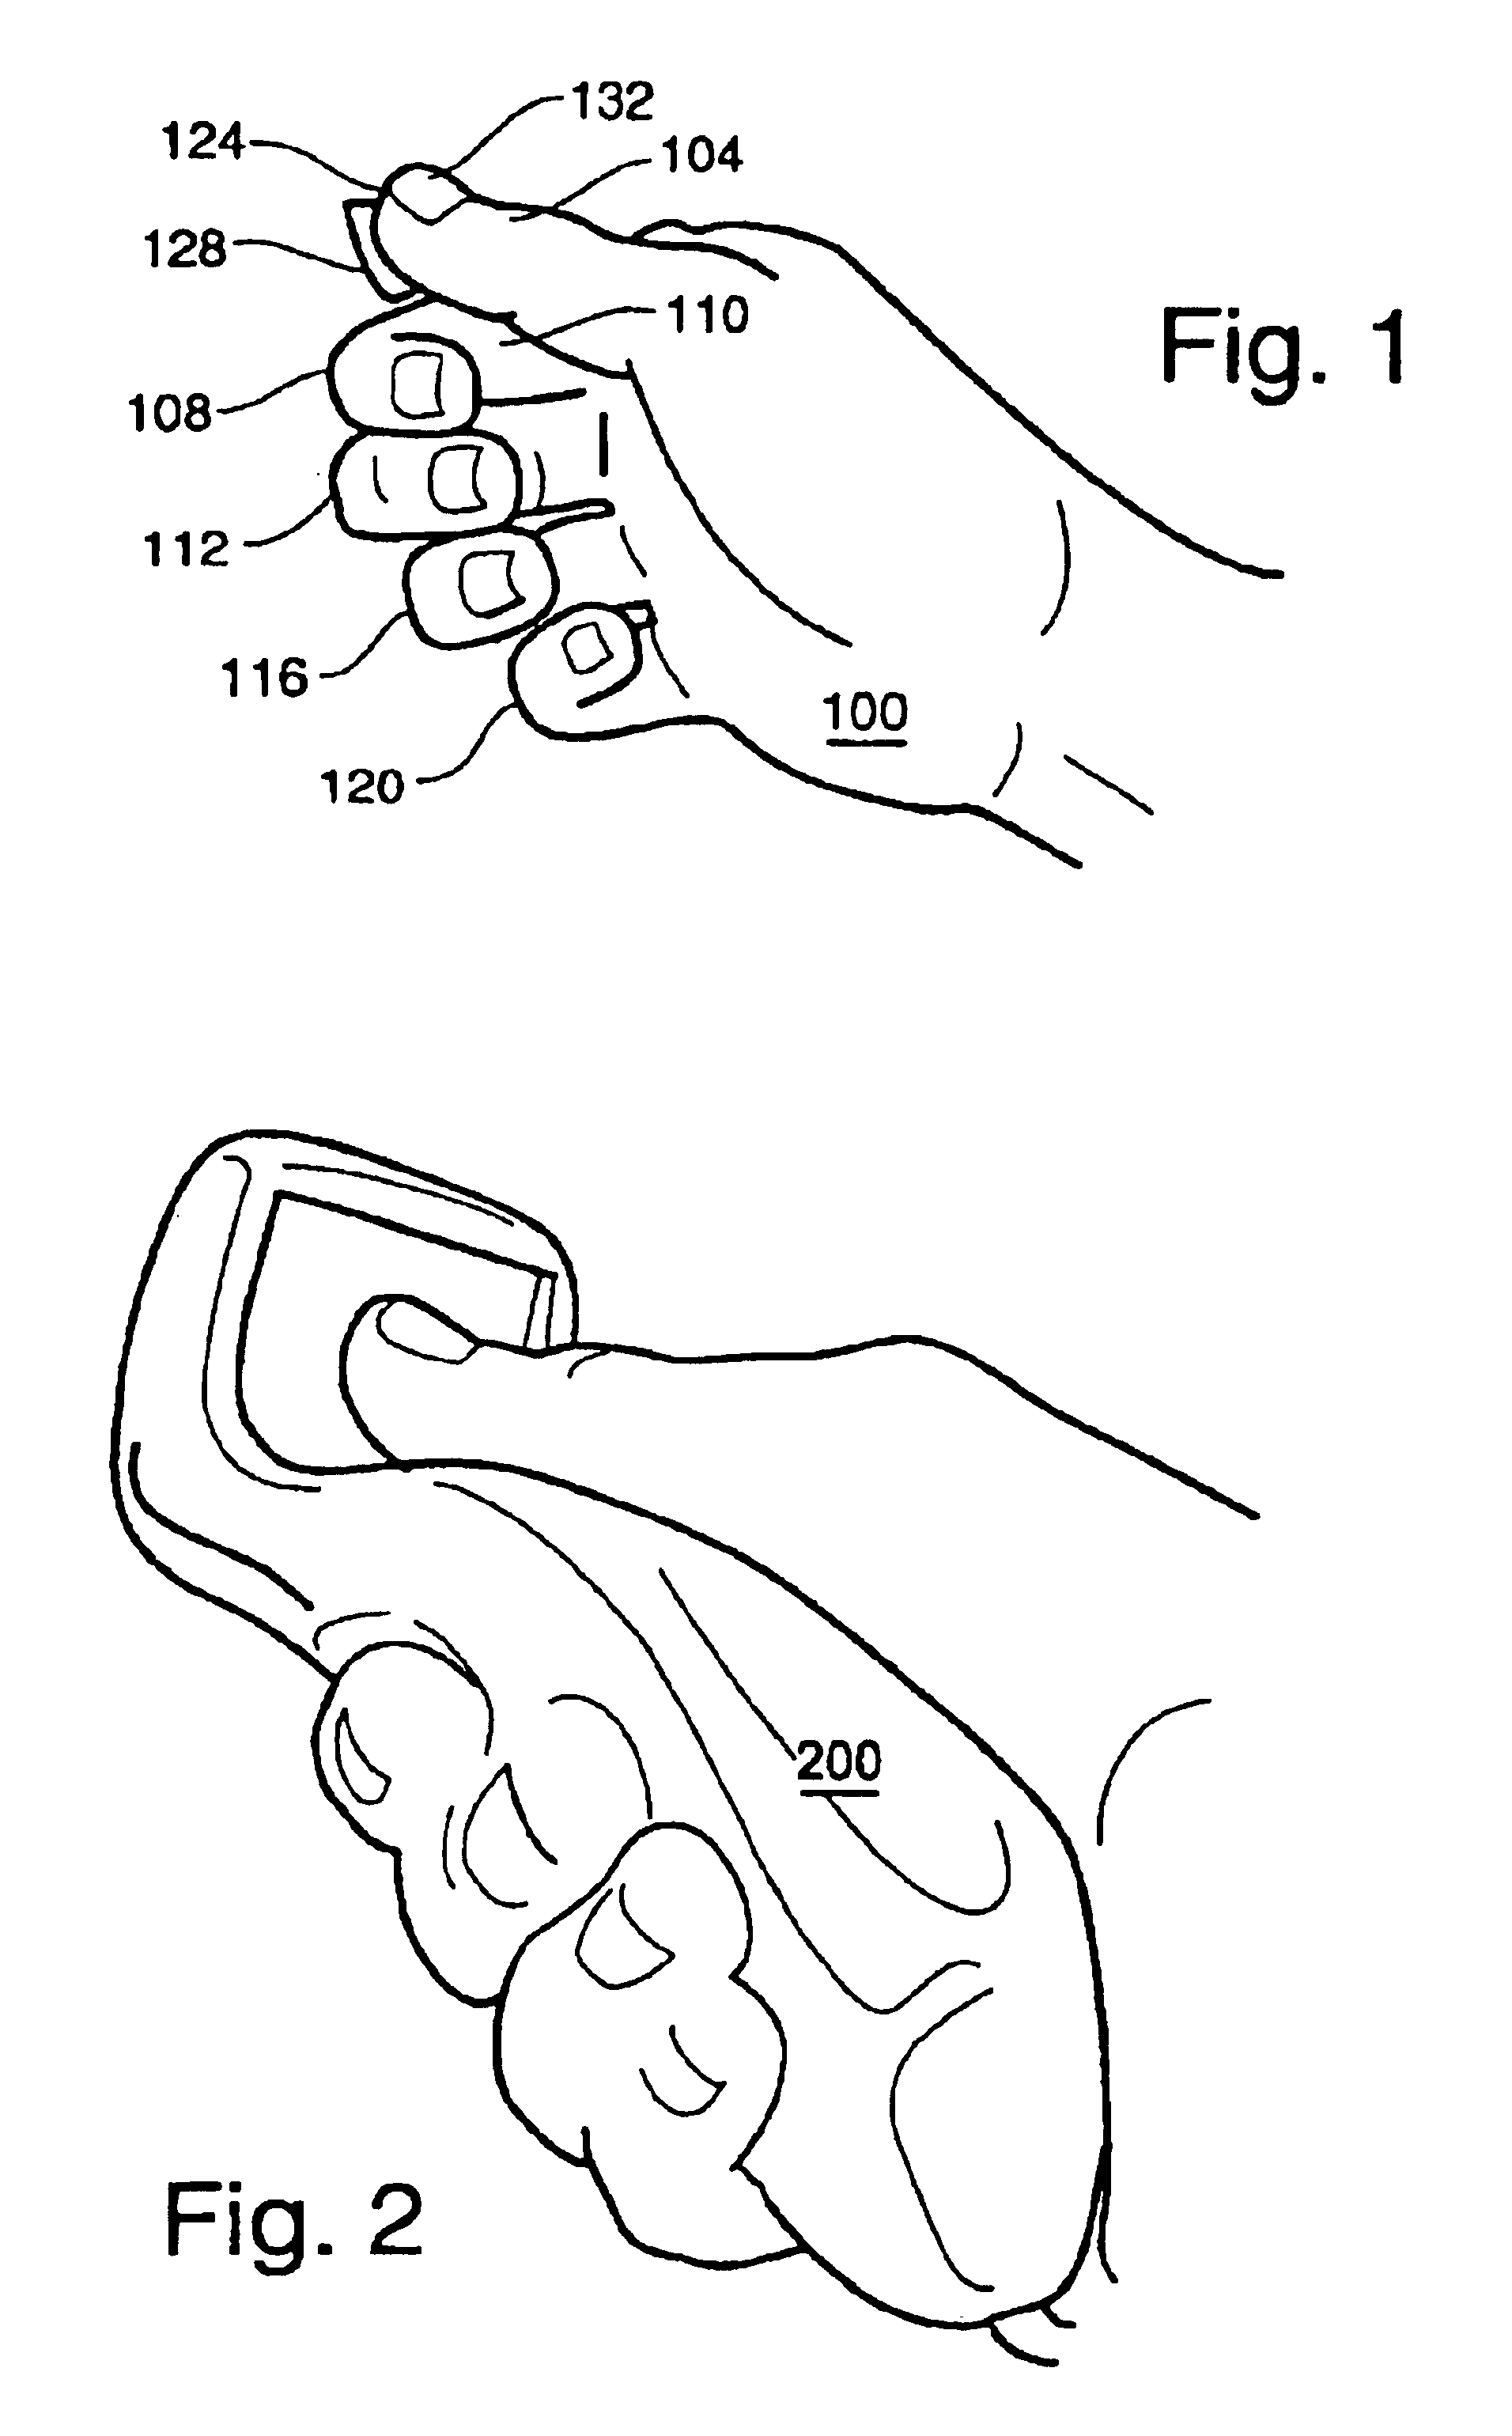 Thumb actuated X-Y input device